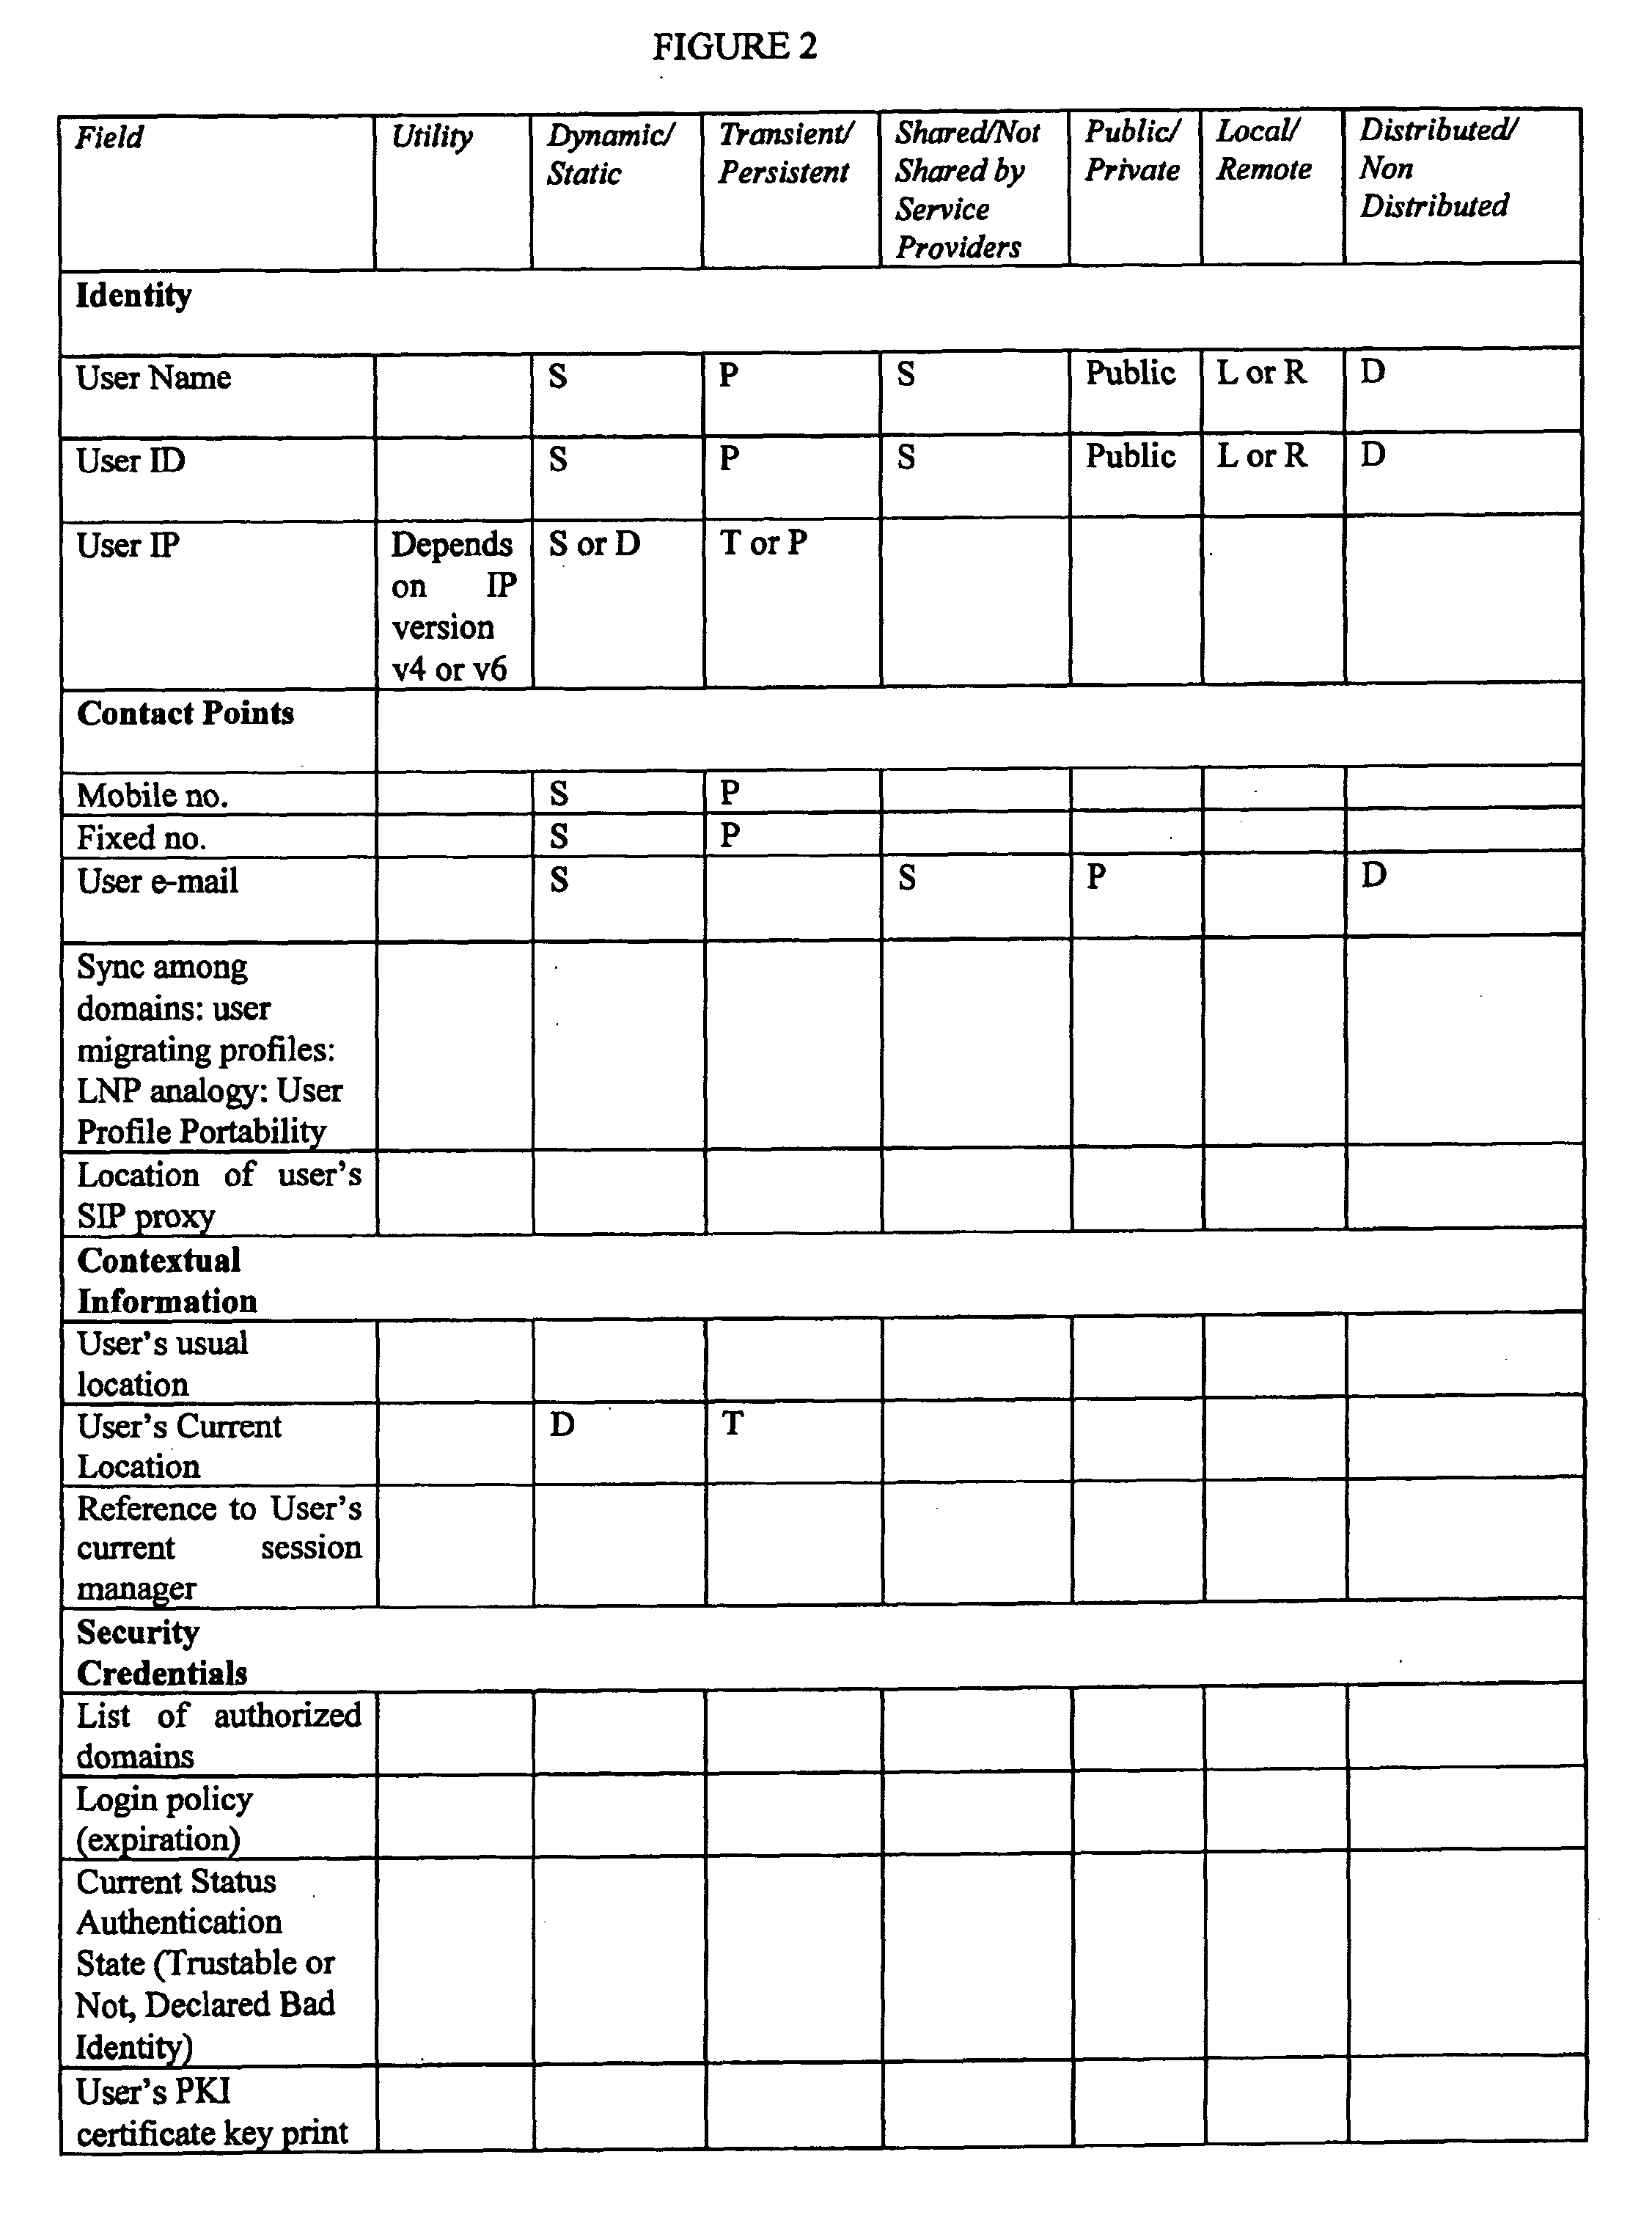 System for managing user profile data